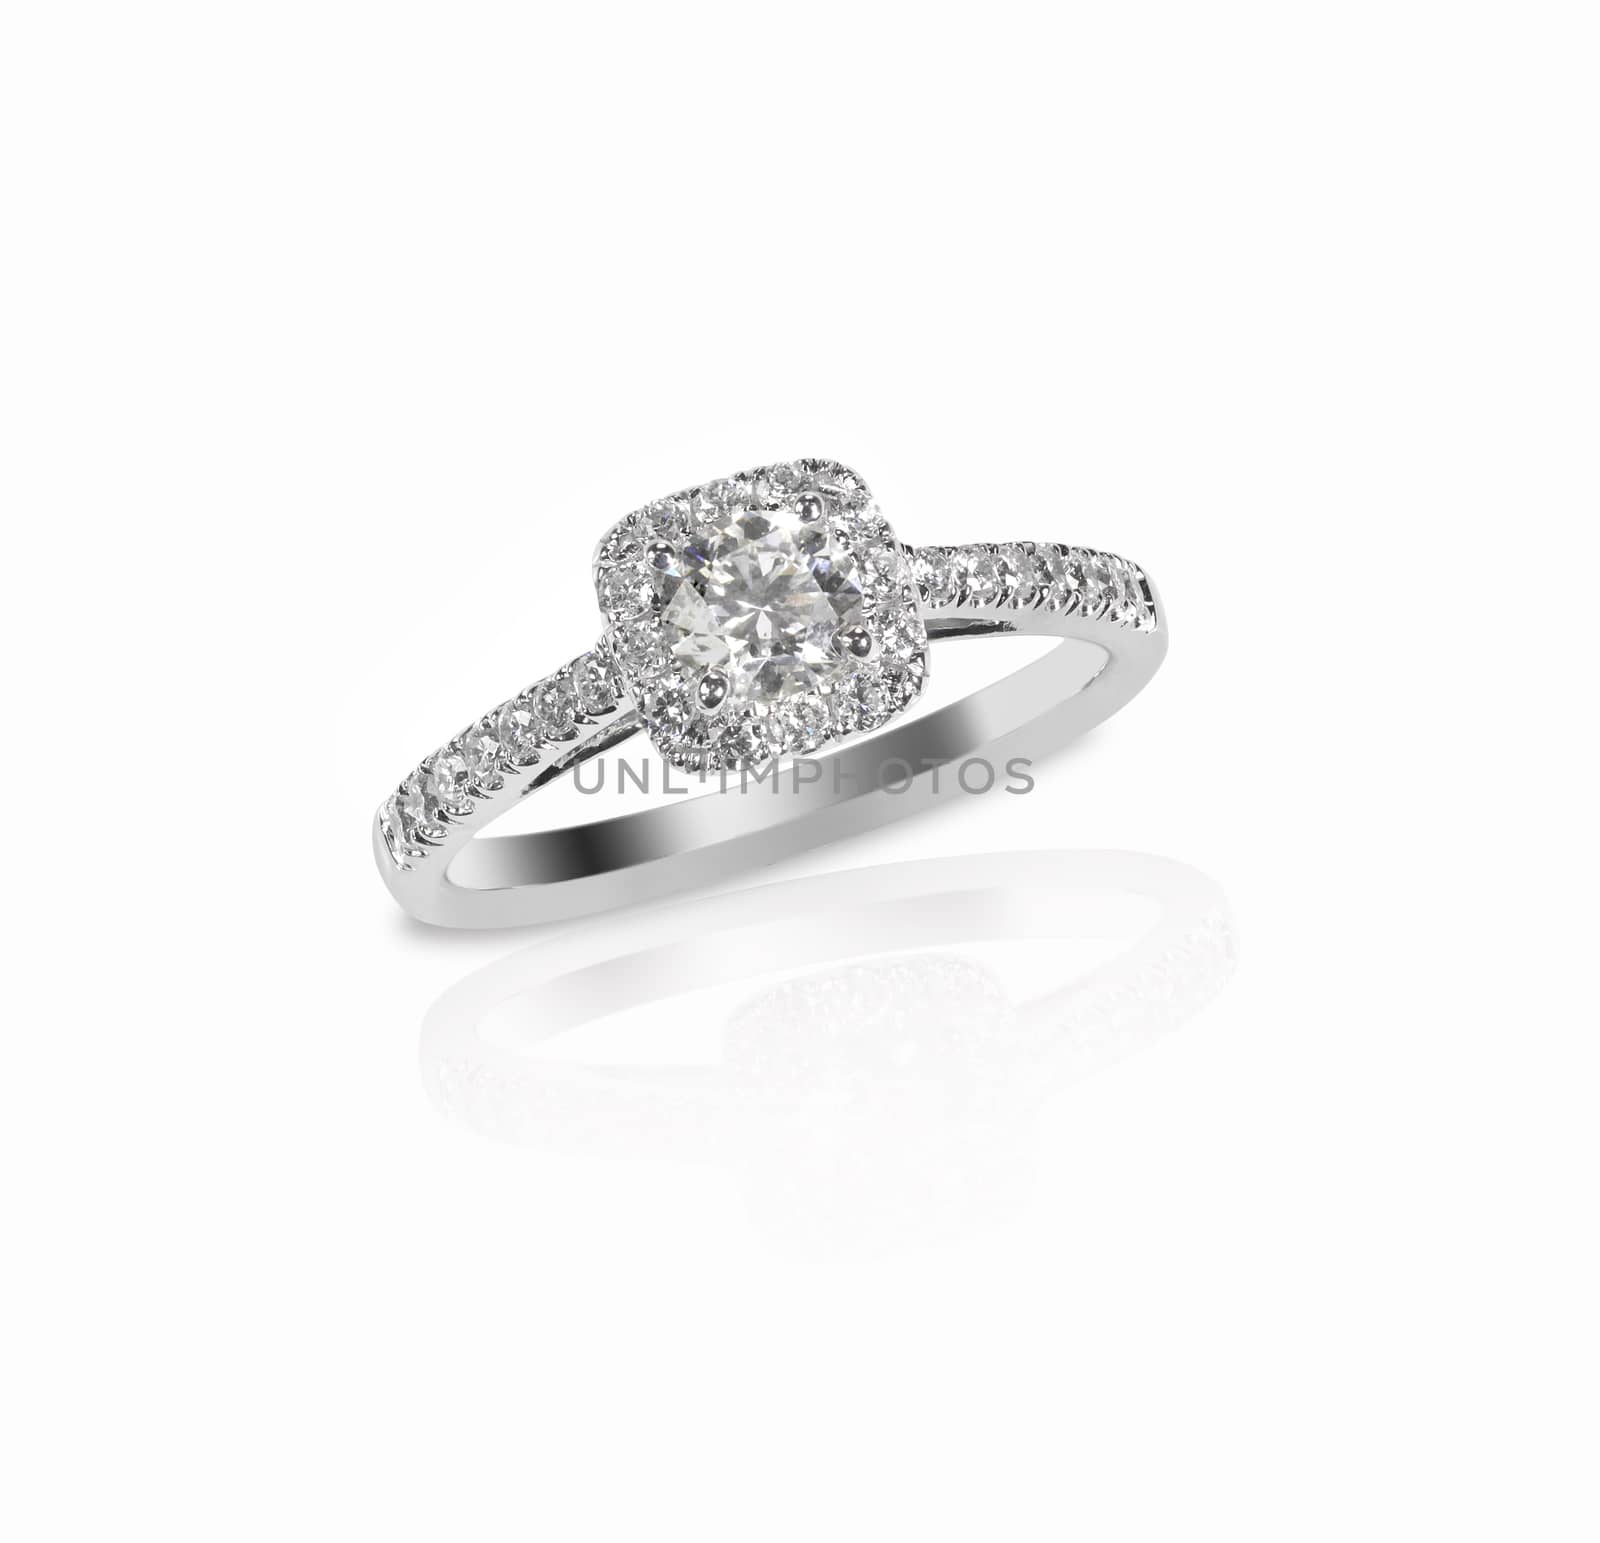 Beautiful diamond wedding engagment band ring solitaire with mul by fruitcocktail